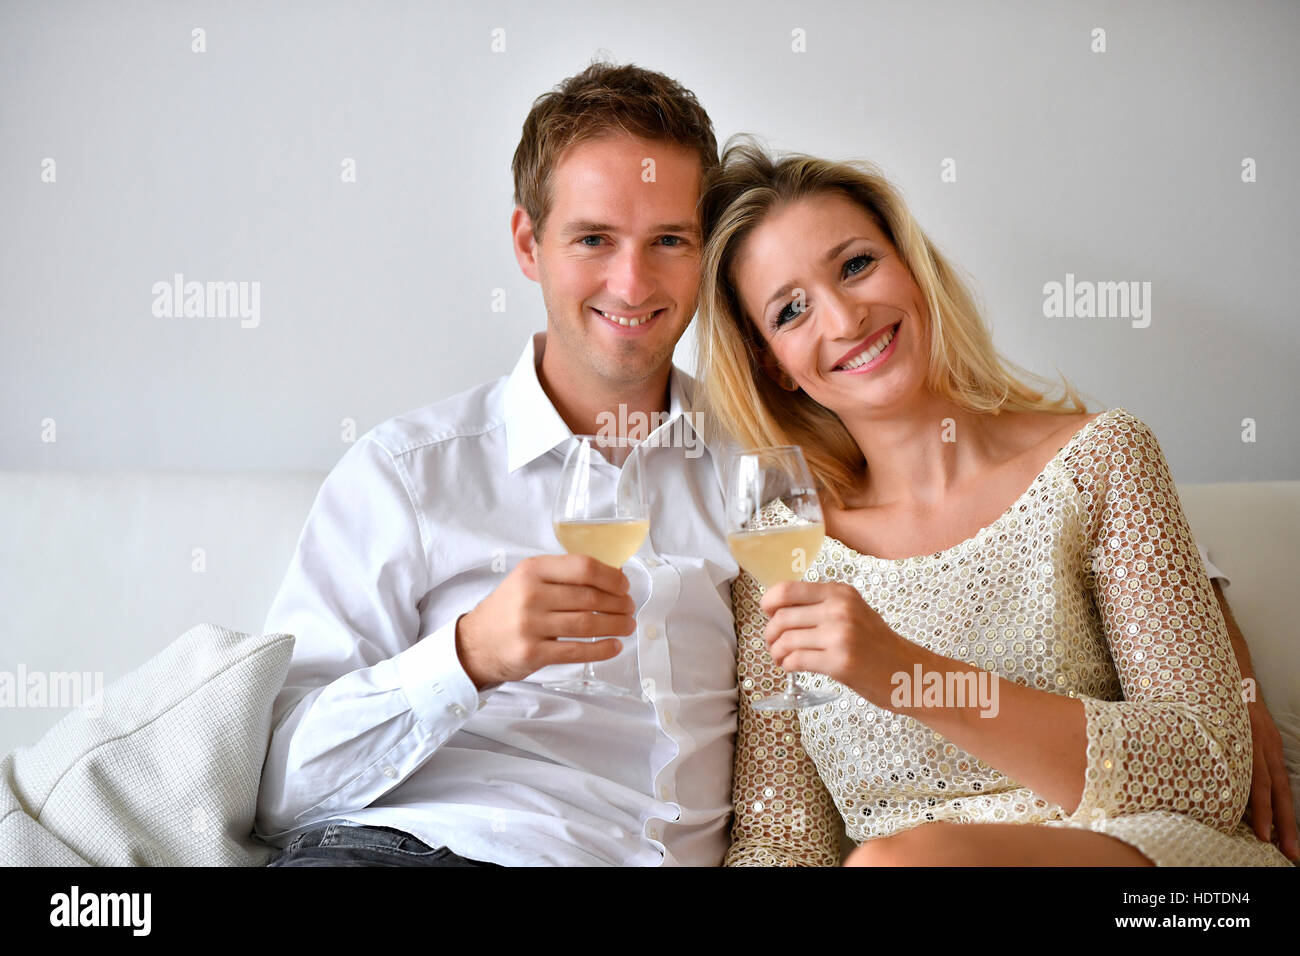 Man, woman, couple on sofa, in love, wine, glass, looking at camera Stock Photo